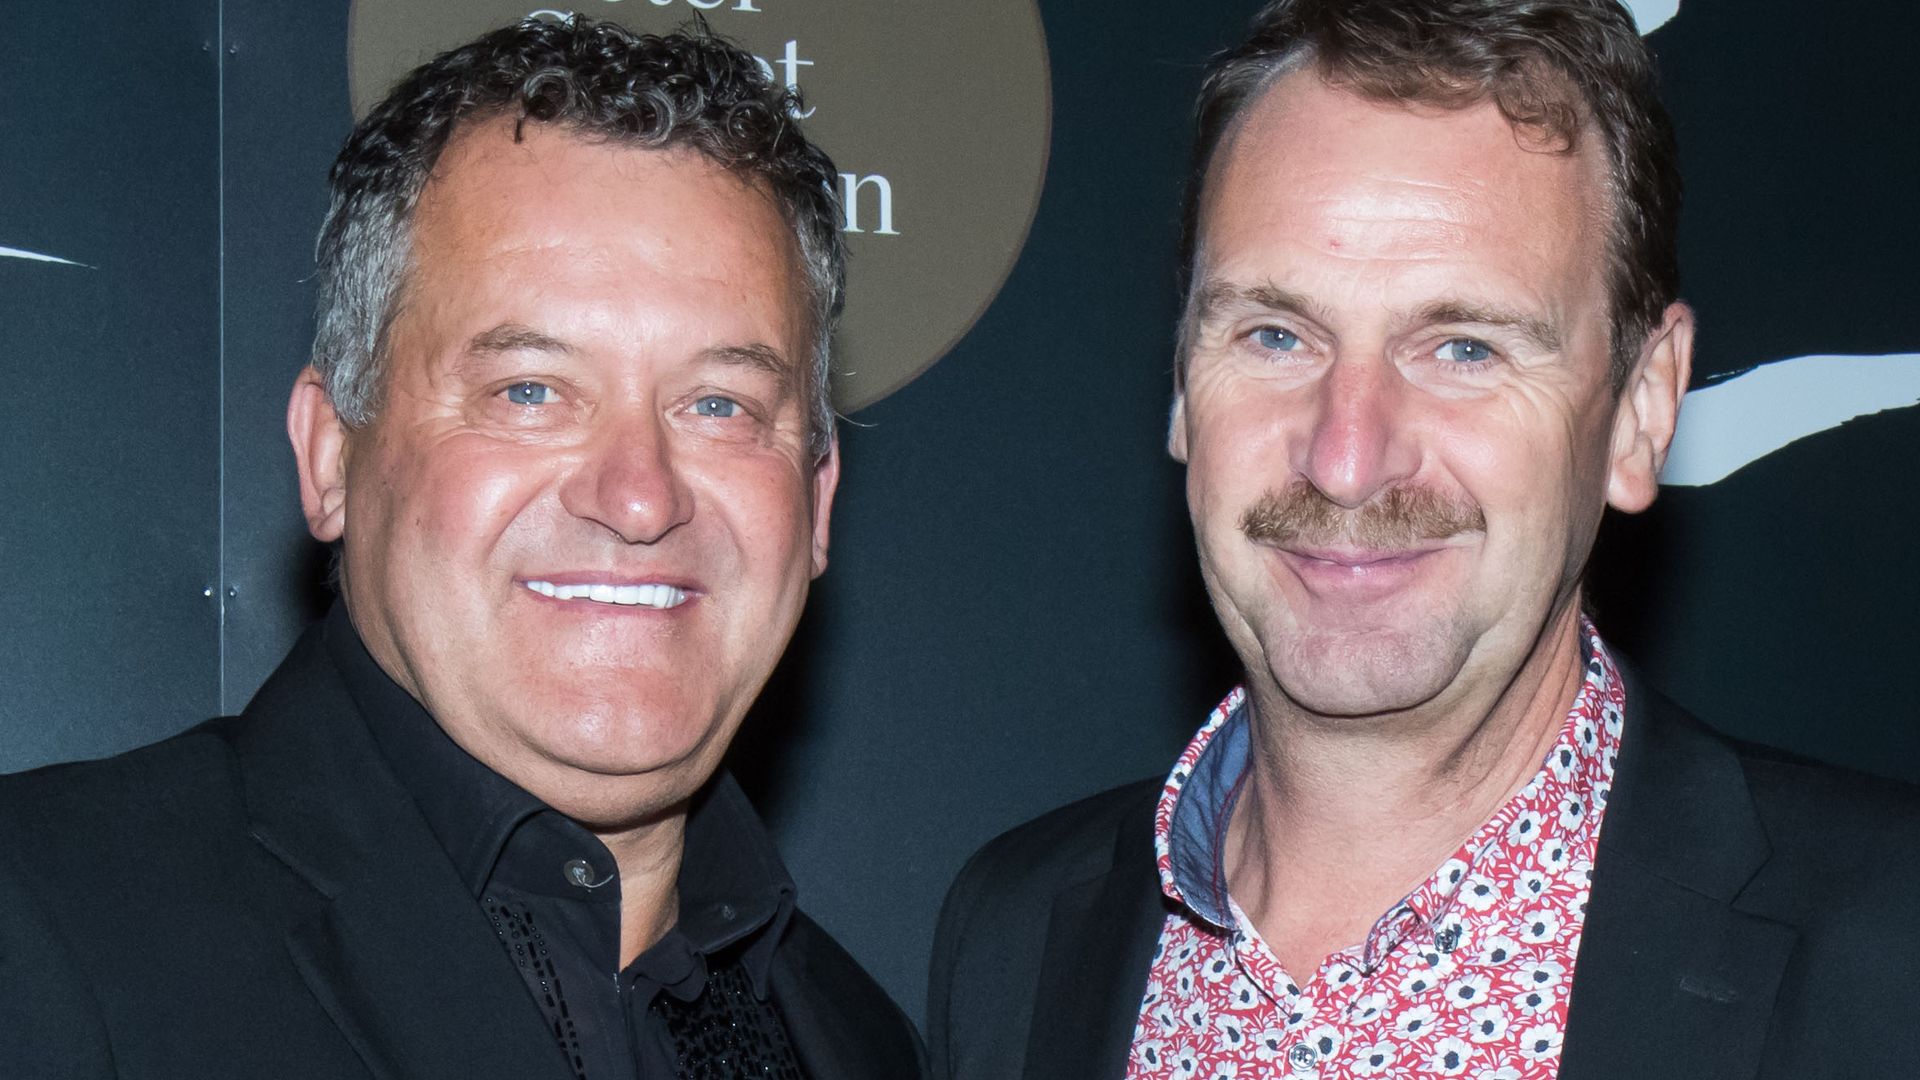 Paul Burrell in a black jacket and his husband Graham Cooper in a pink floral shirt